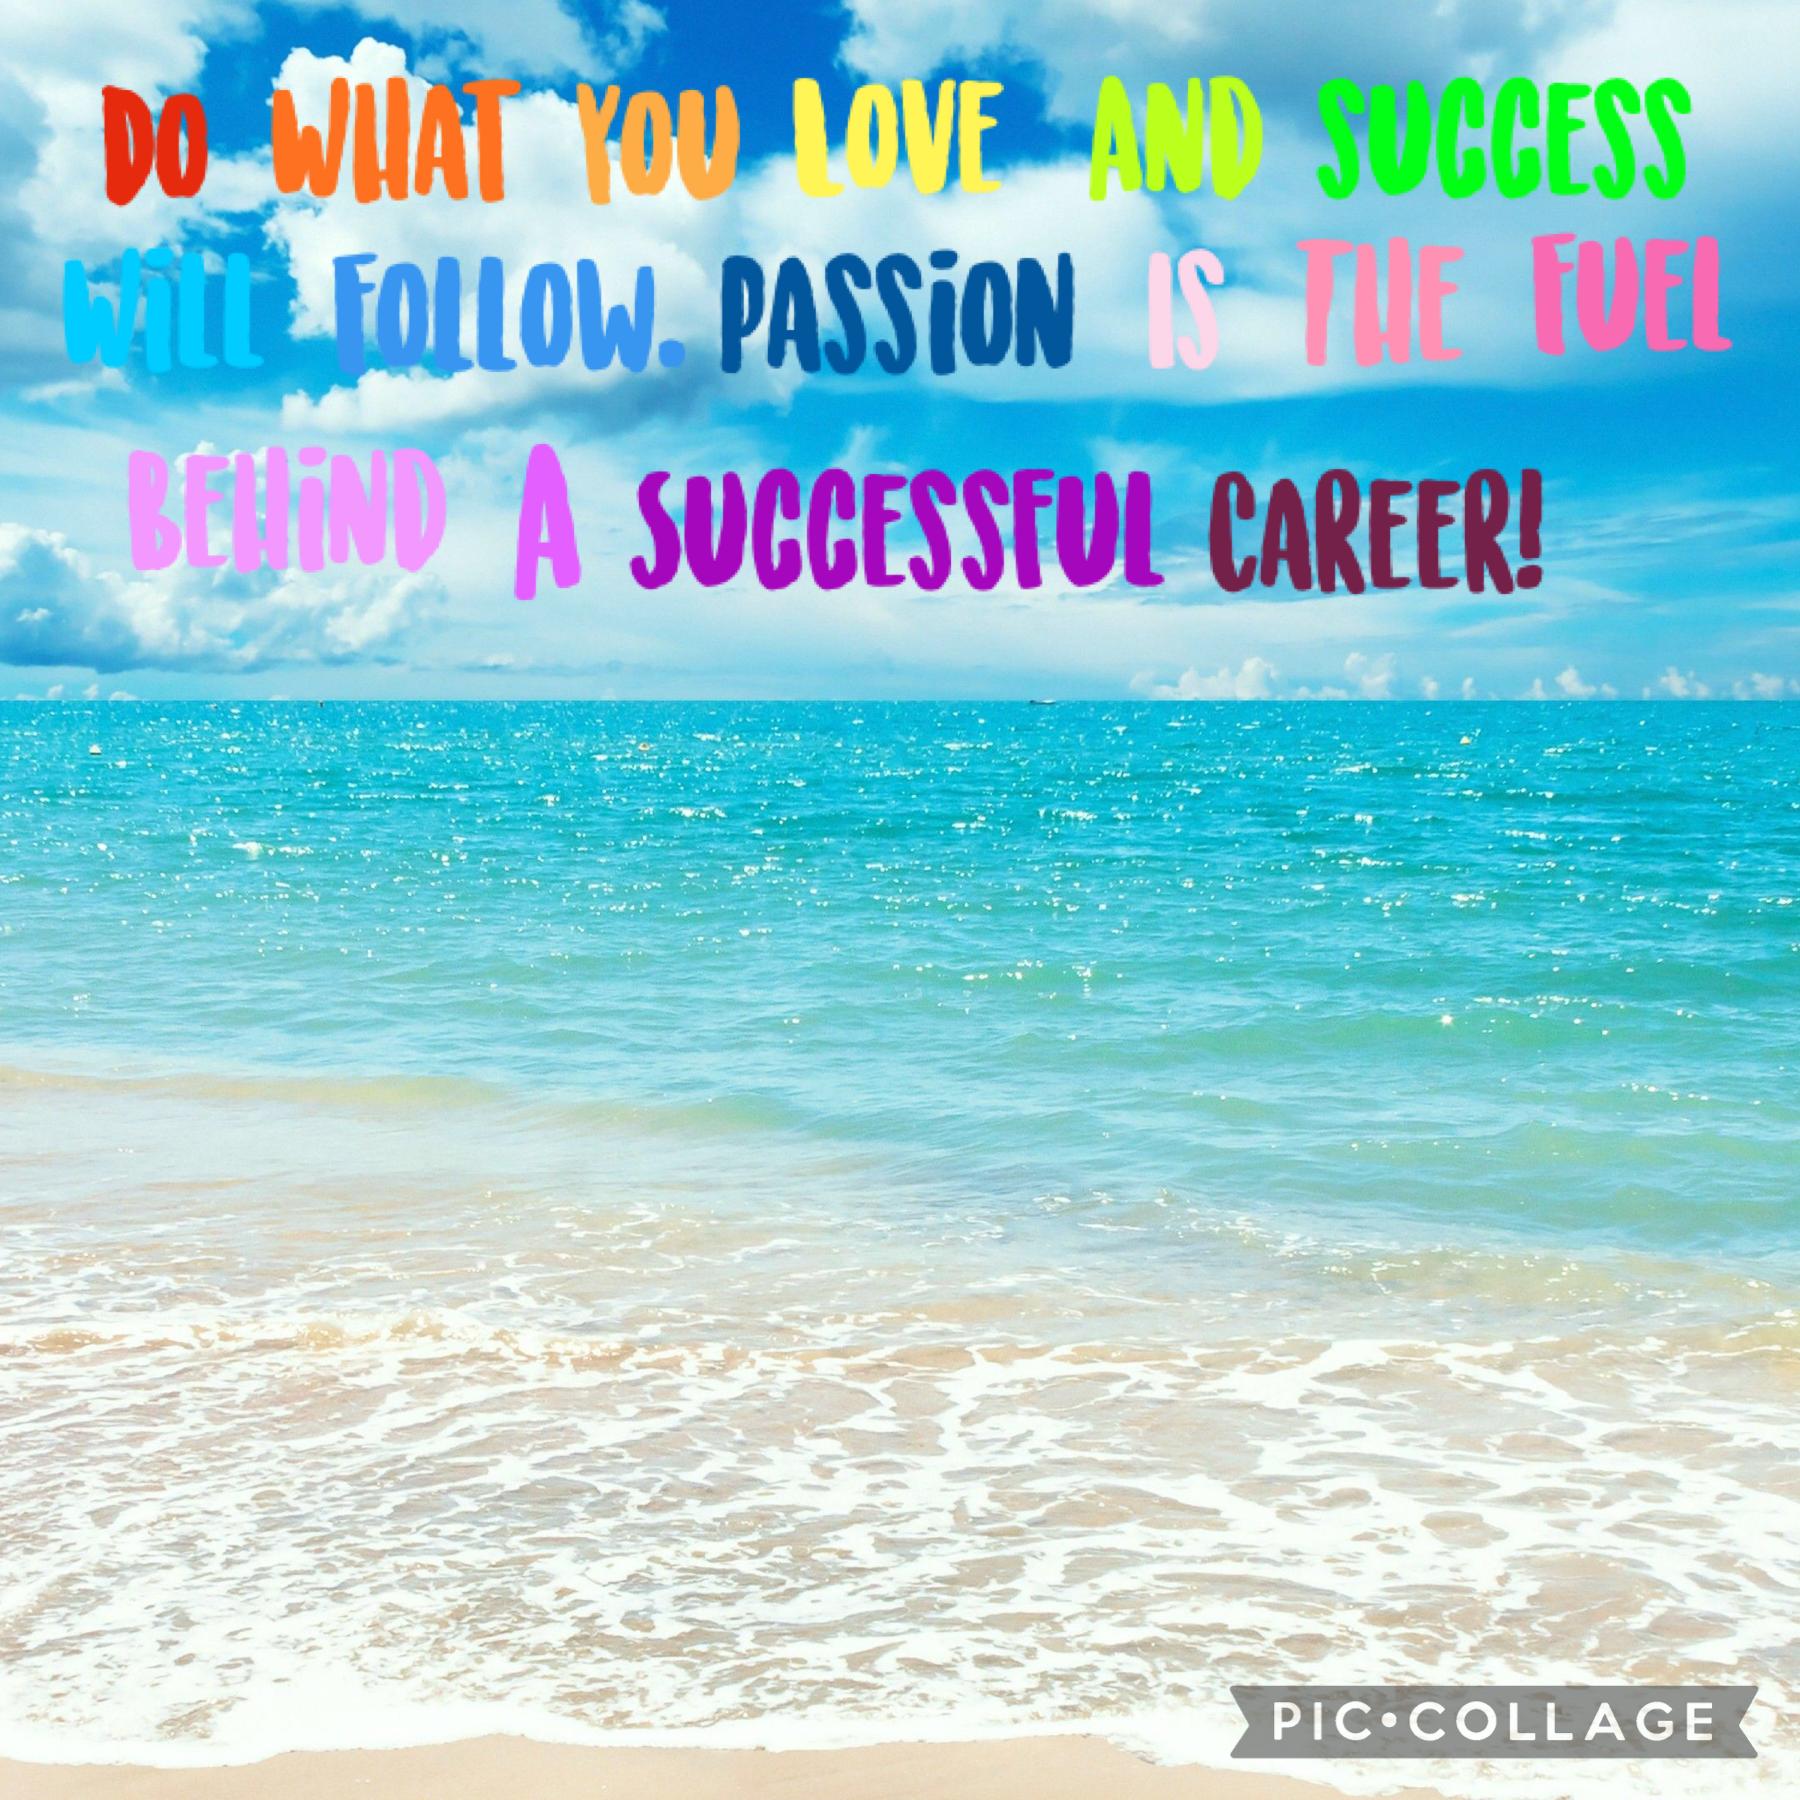 Believe in yourself you are capable of anything!

Do what you love and success will follow. Passion is the fuel to a successful career

Carlablocks 